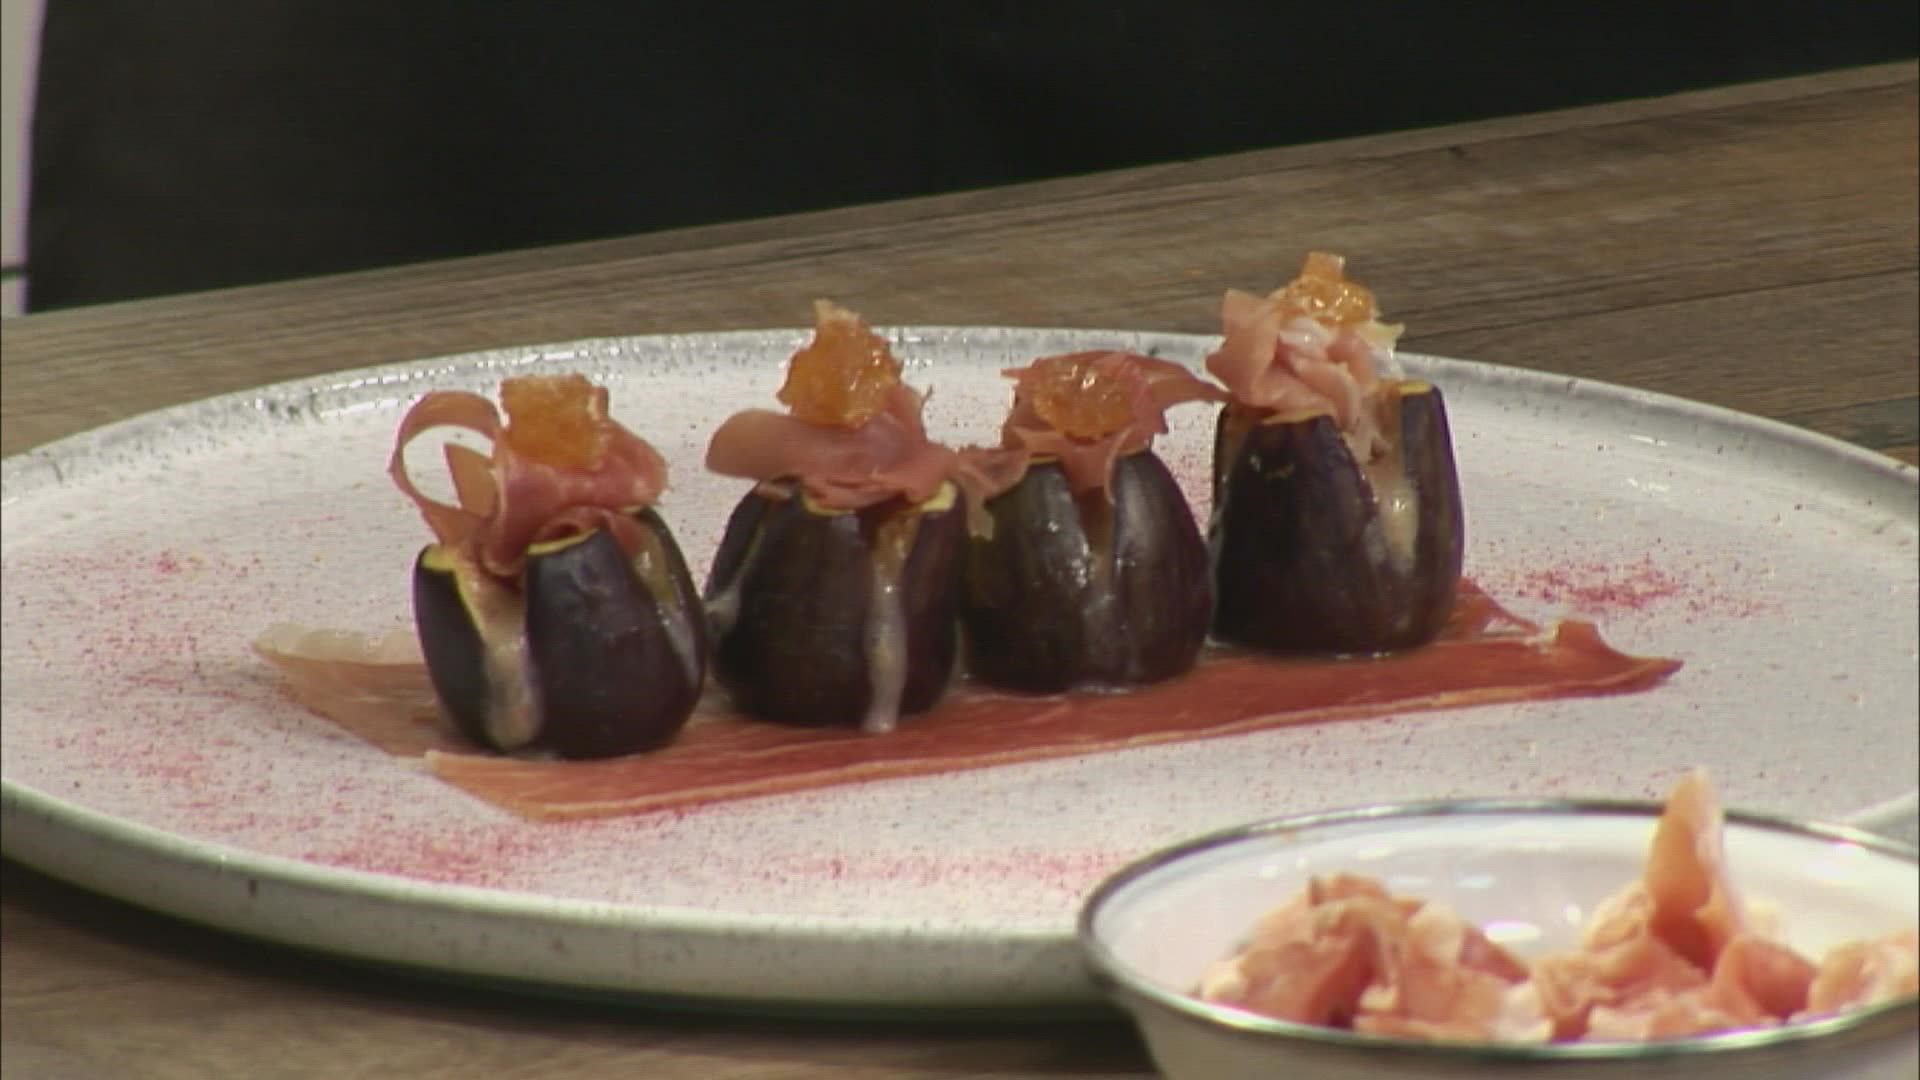 Chef Daron Goldstein from Provender Kitchen + Bar in Ellsworth is in the 207 Kitchen making a fresh fig appetizer.